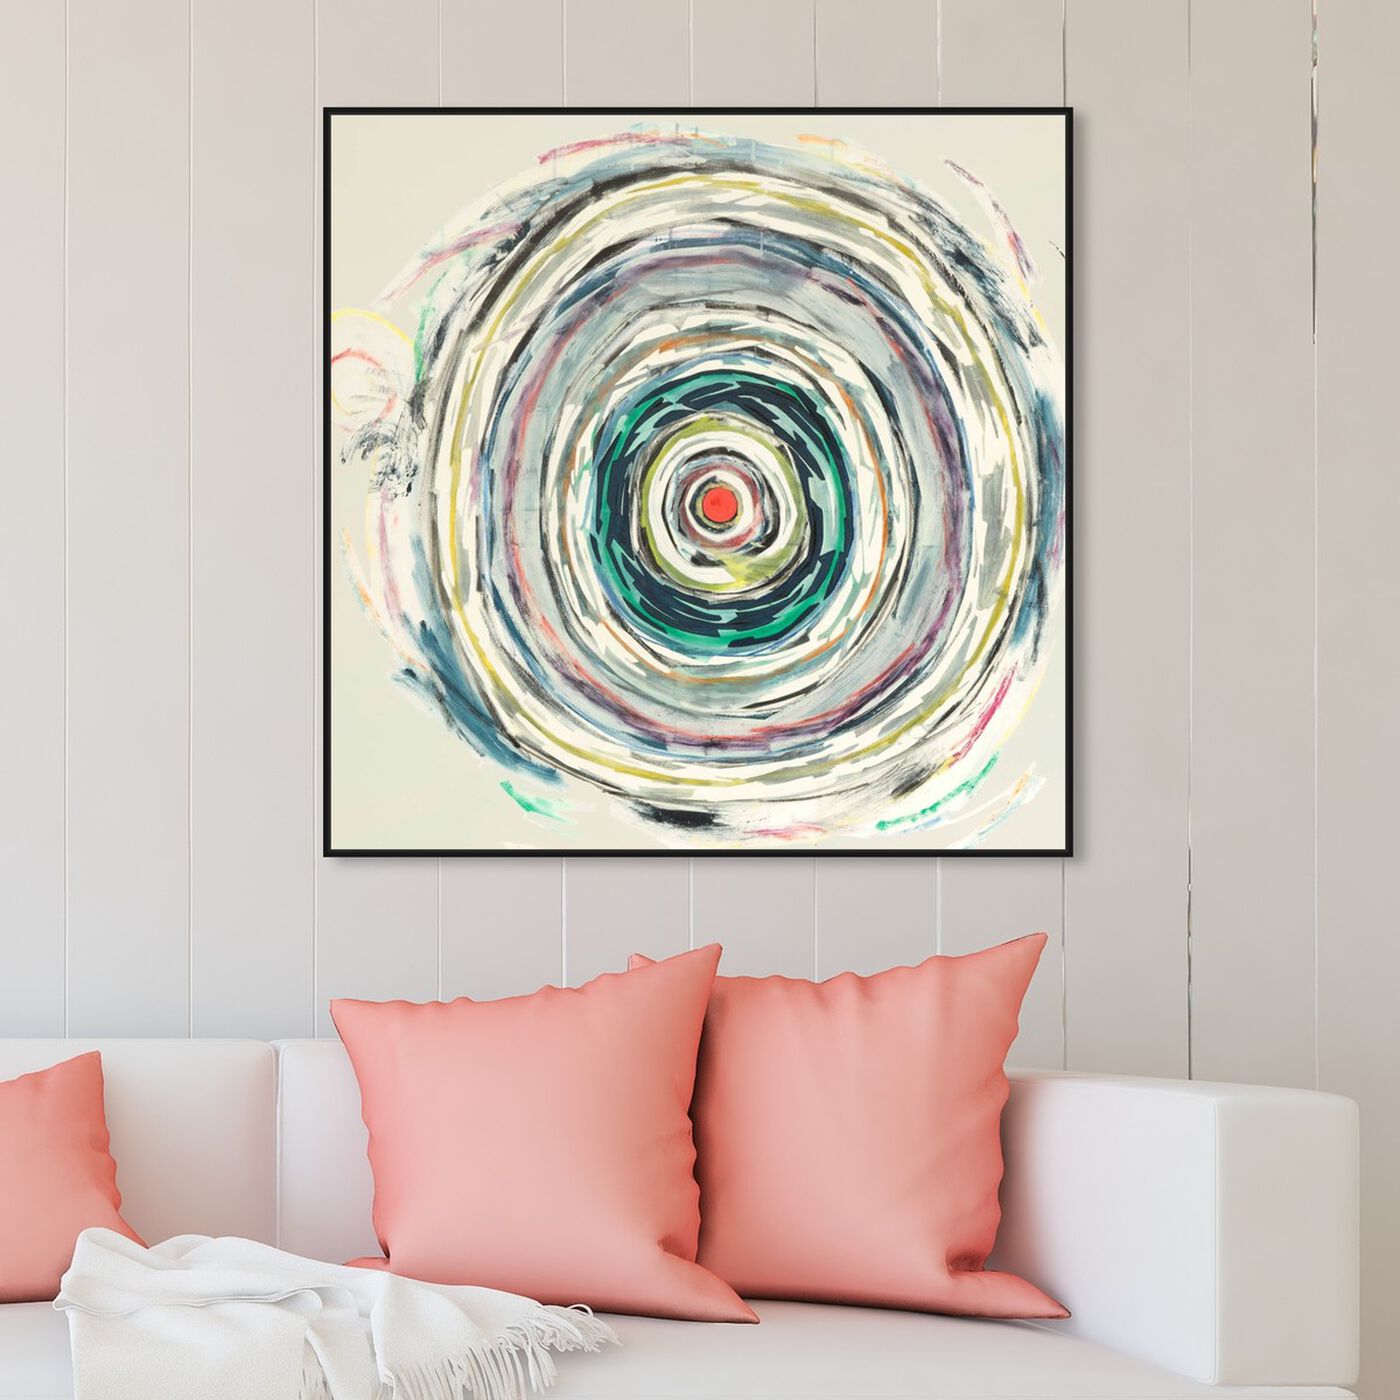 Hanging view of Sai - Pictis Spiralis III 1NM1760 featuring abstract and paint art.